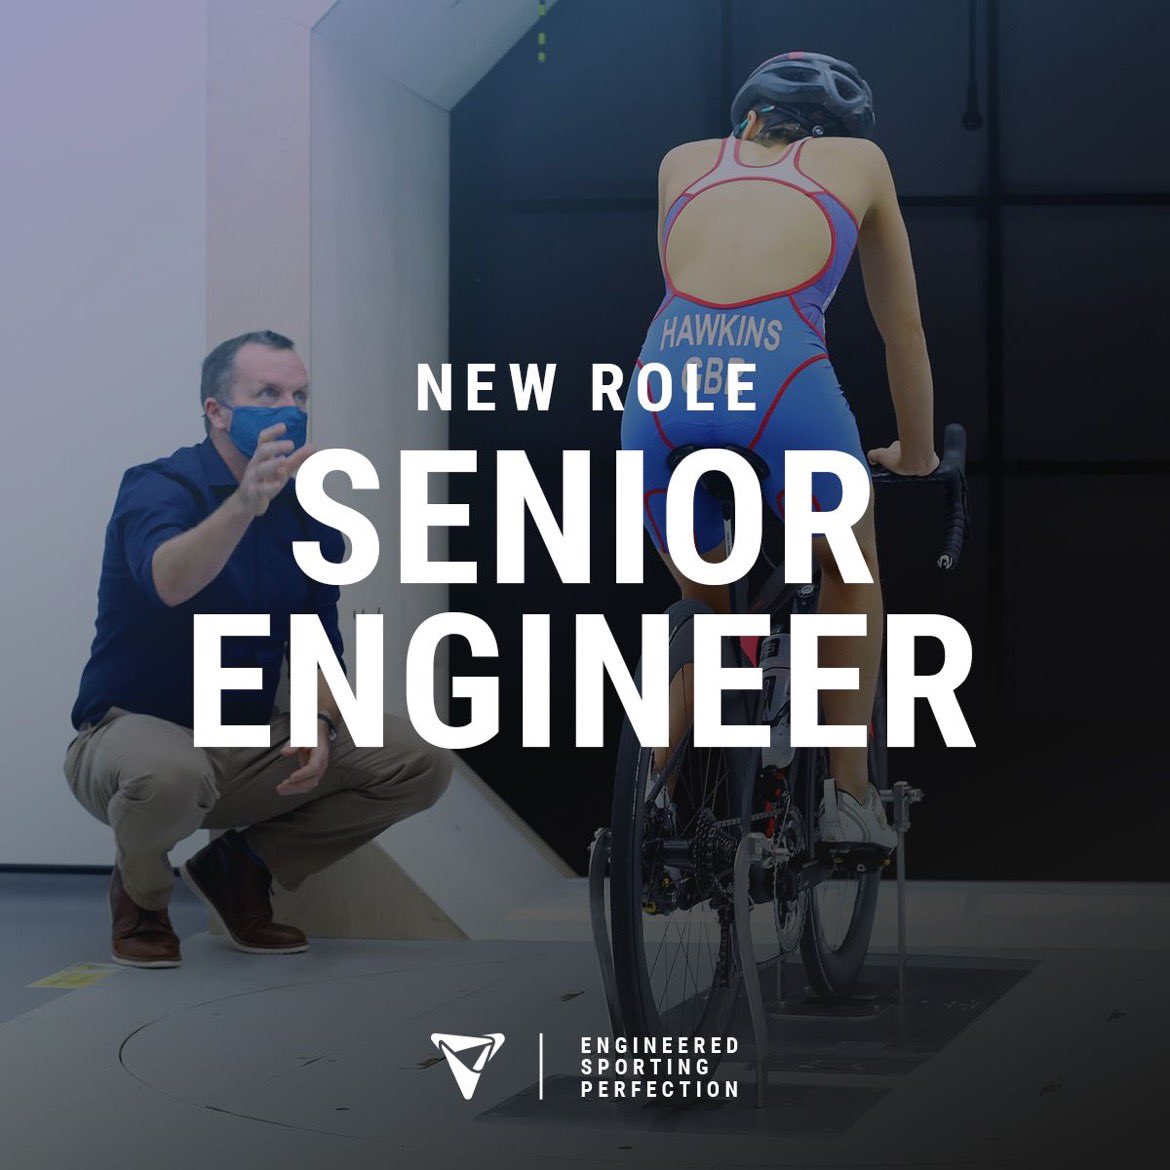 We are recruiting for a Senior Engineer to join our team for projects and programmes in sport performance research and development. vorteqsports.co.uk/2021/12/13/new… #recruiting #newrole #engineering #sportperformance #cycling #aerodynamics #vacancy